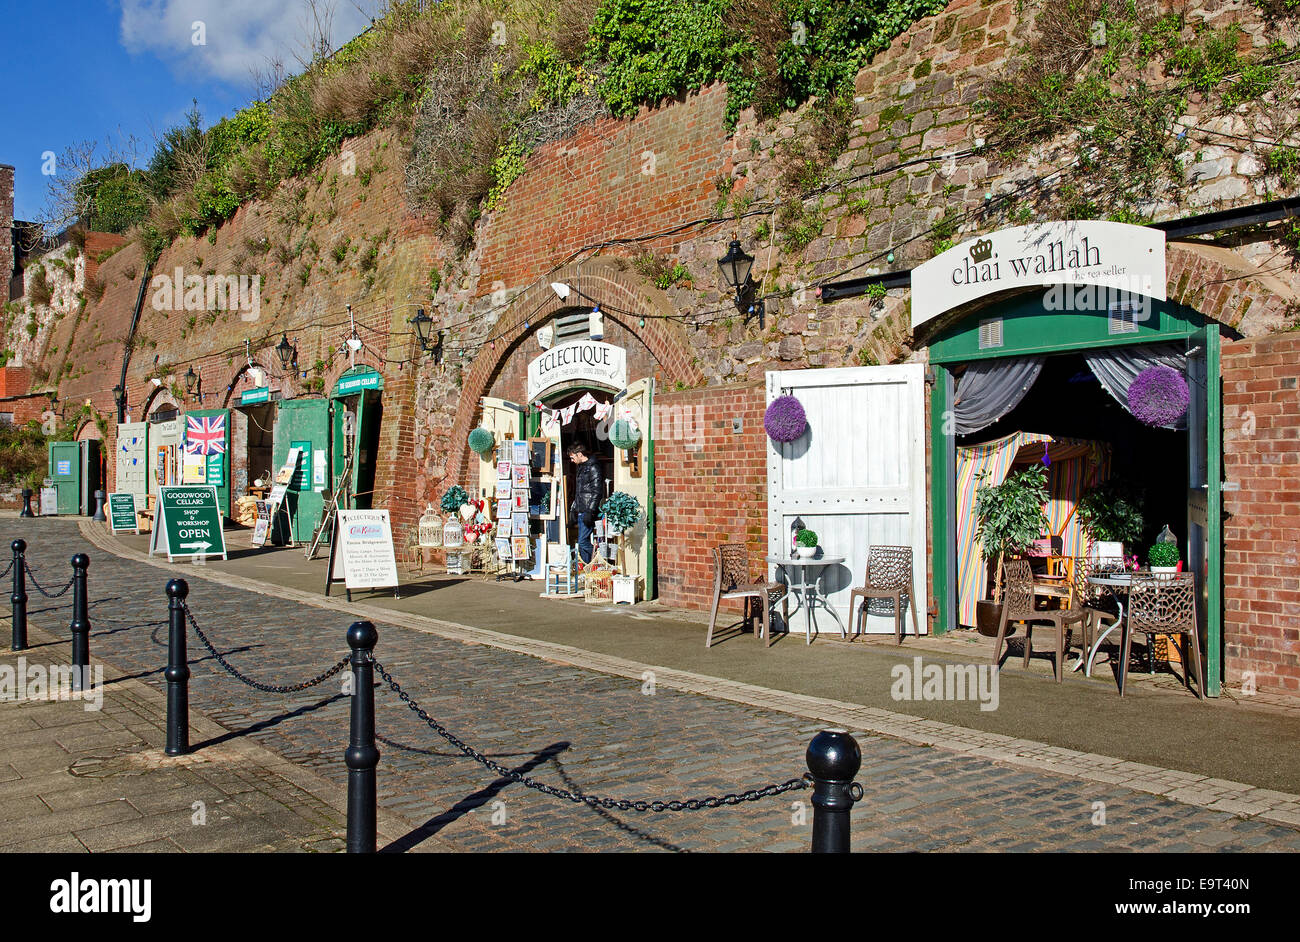 Independent traders using old storage sheds as shops along the Quay at Exeter in Devon, UK Stock Photo